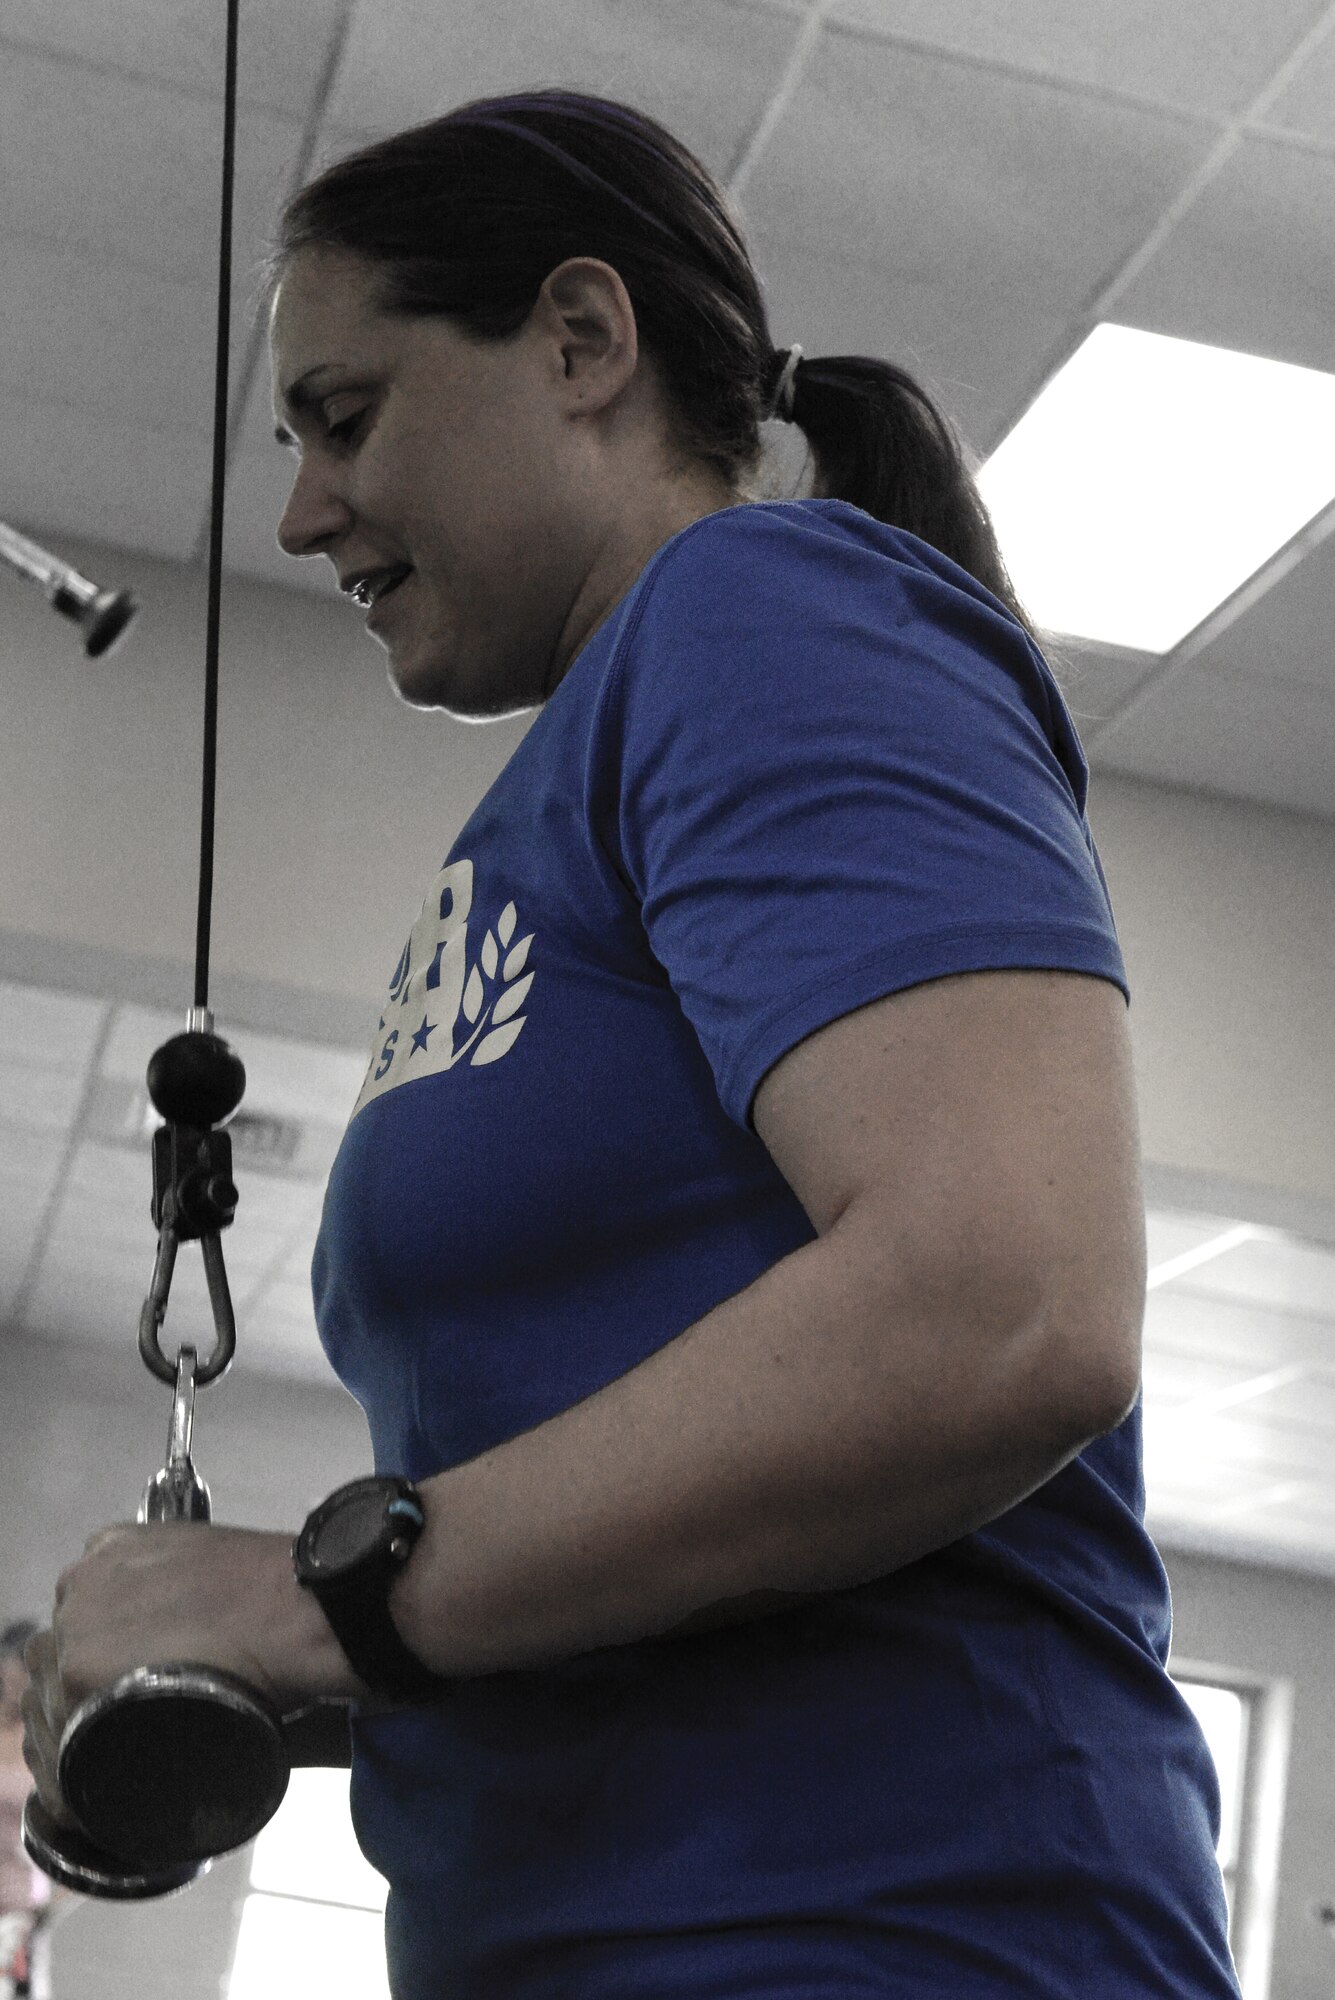 U.S. Air Force retired Maj. Jen Kyseth strengthens her triceps using weights at the Young Men’s Christian Association to prepare for the Warrior Games, Sumter, S.C., May 8, 2014. Kyseth works out five days a week alternating swimming and resistance training for the cycling, swimming, and shooting events in the Games. (U.S. Air Force photo by Airman 1st Class Diana M. Cossaboom/Released)
